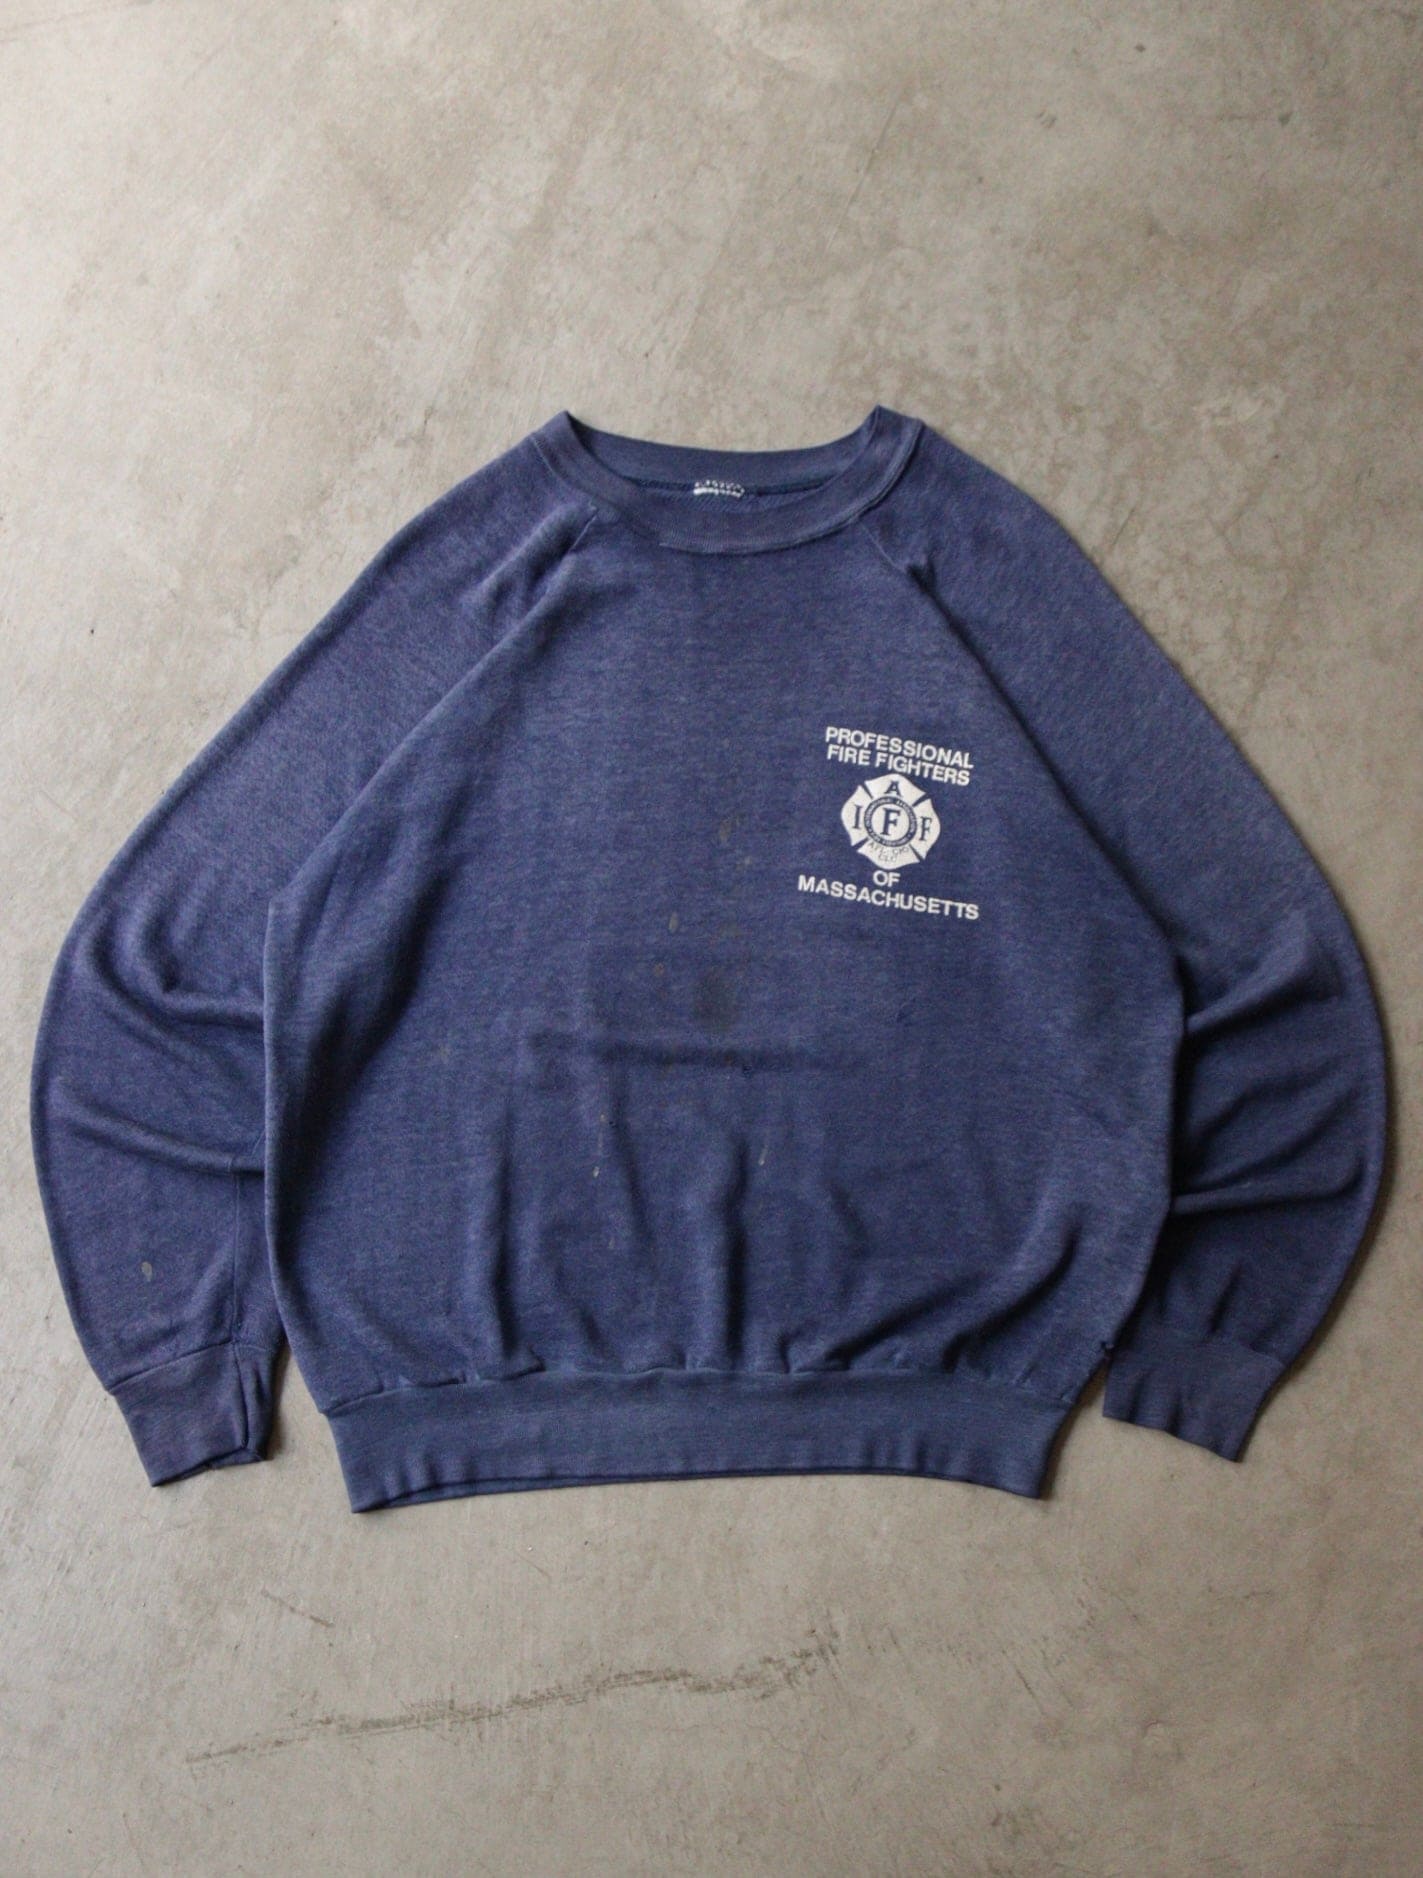 1980S DISTRESSED FADED PROFESSIONAL FIREFIGHTERS SWEATSHIRT